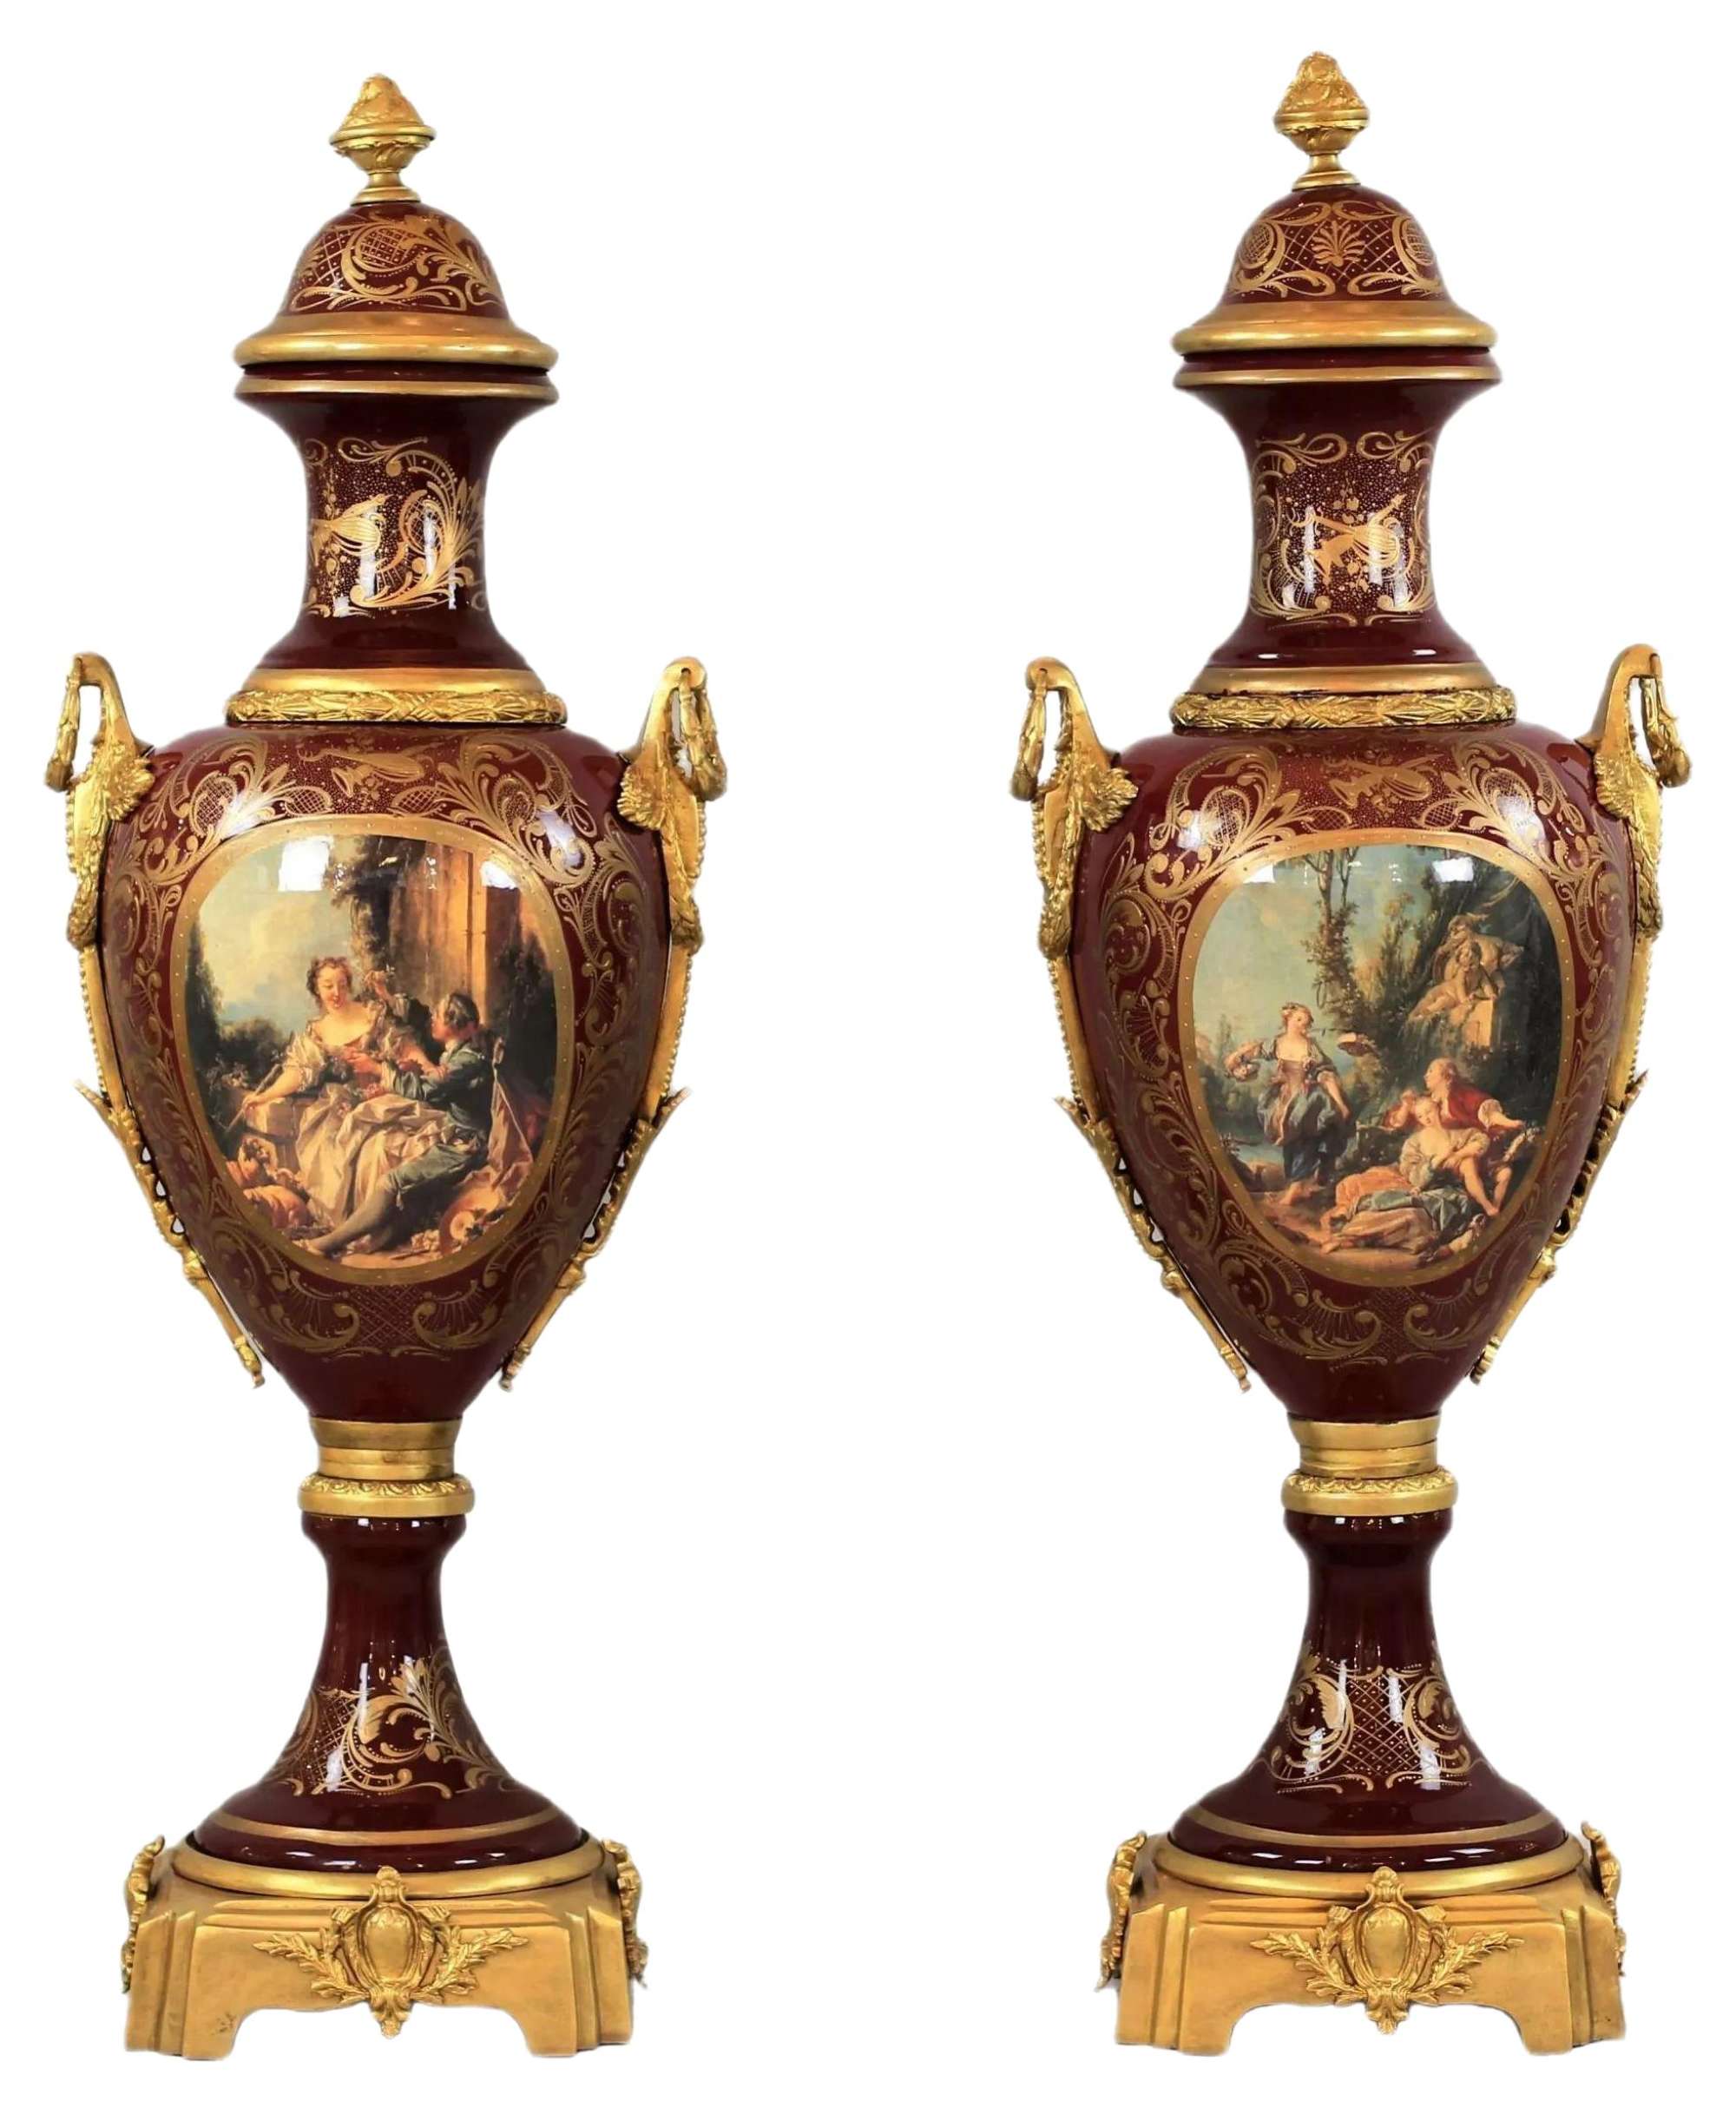 Floor Vases in the Style of Sevres, Set of 2